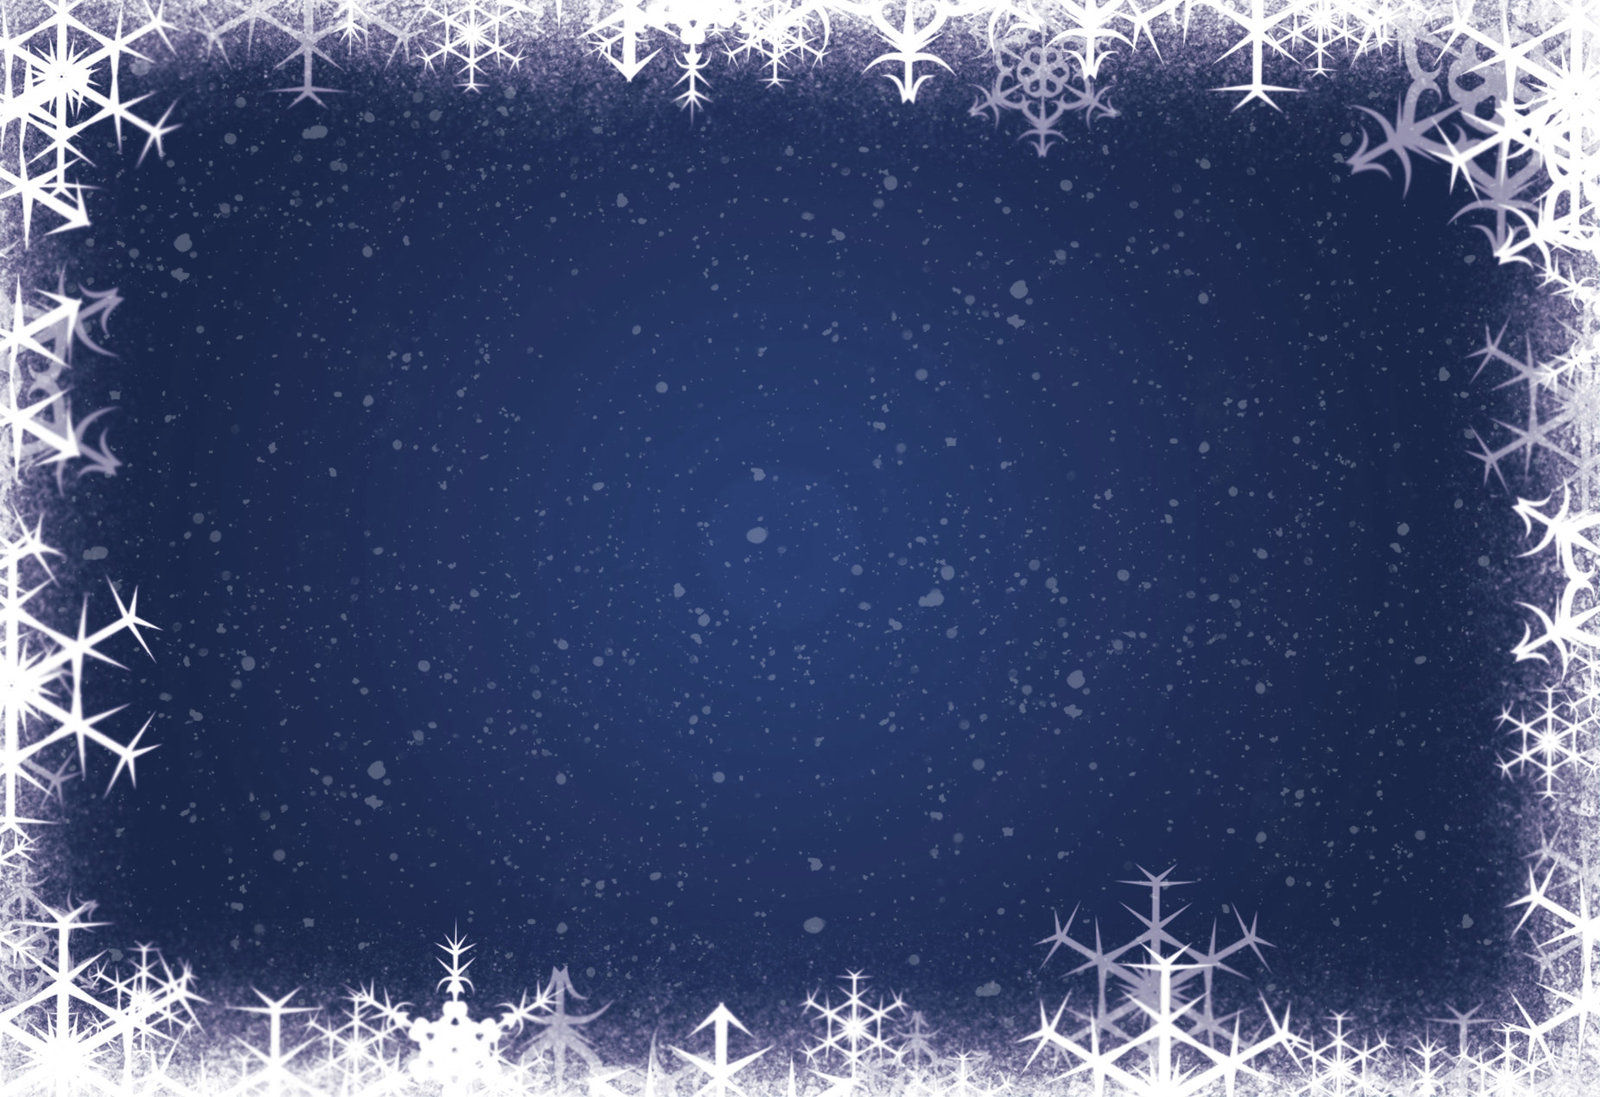 Snowflake Background By Pvs Pixievamp Stock